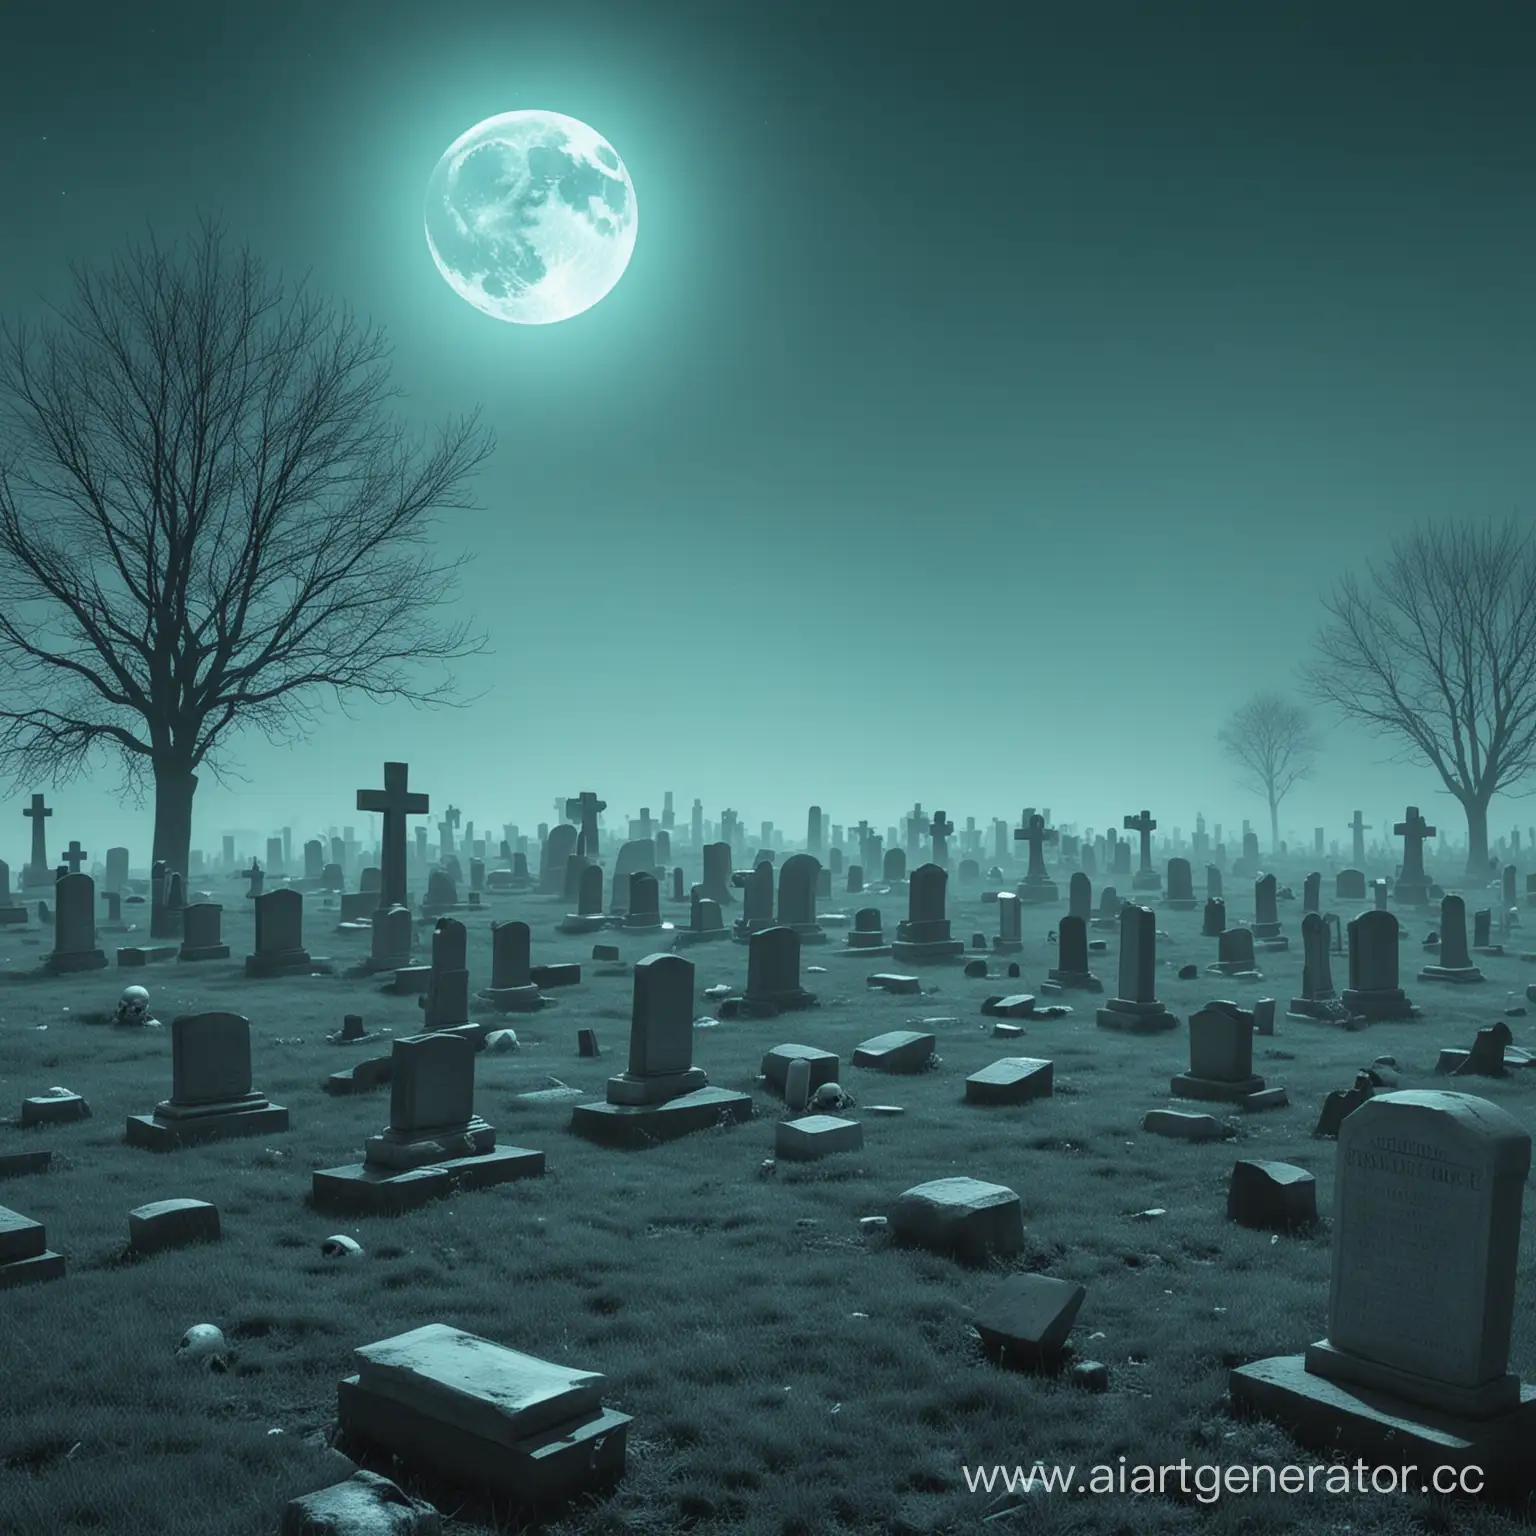 Afterlife-Serenity-Turquoise-Dawn-in-a-Cemetery